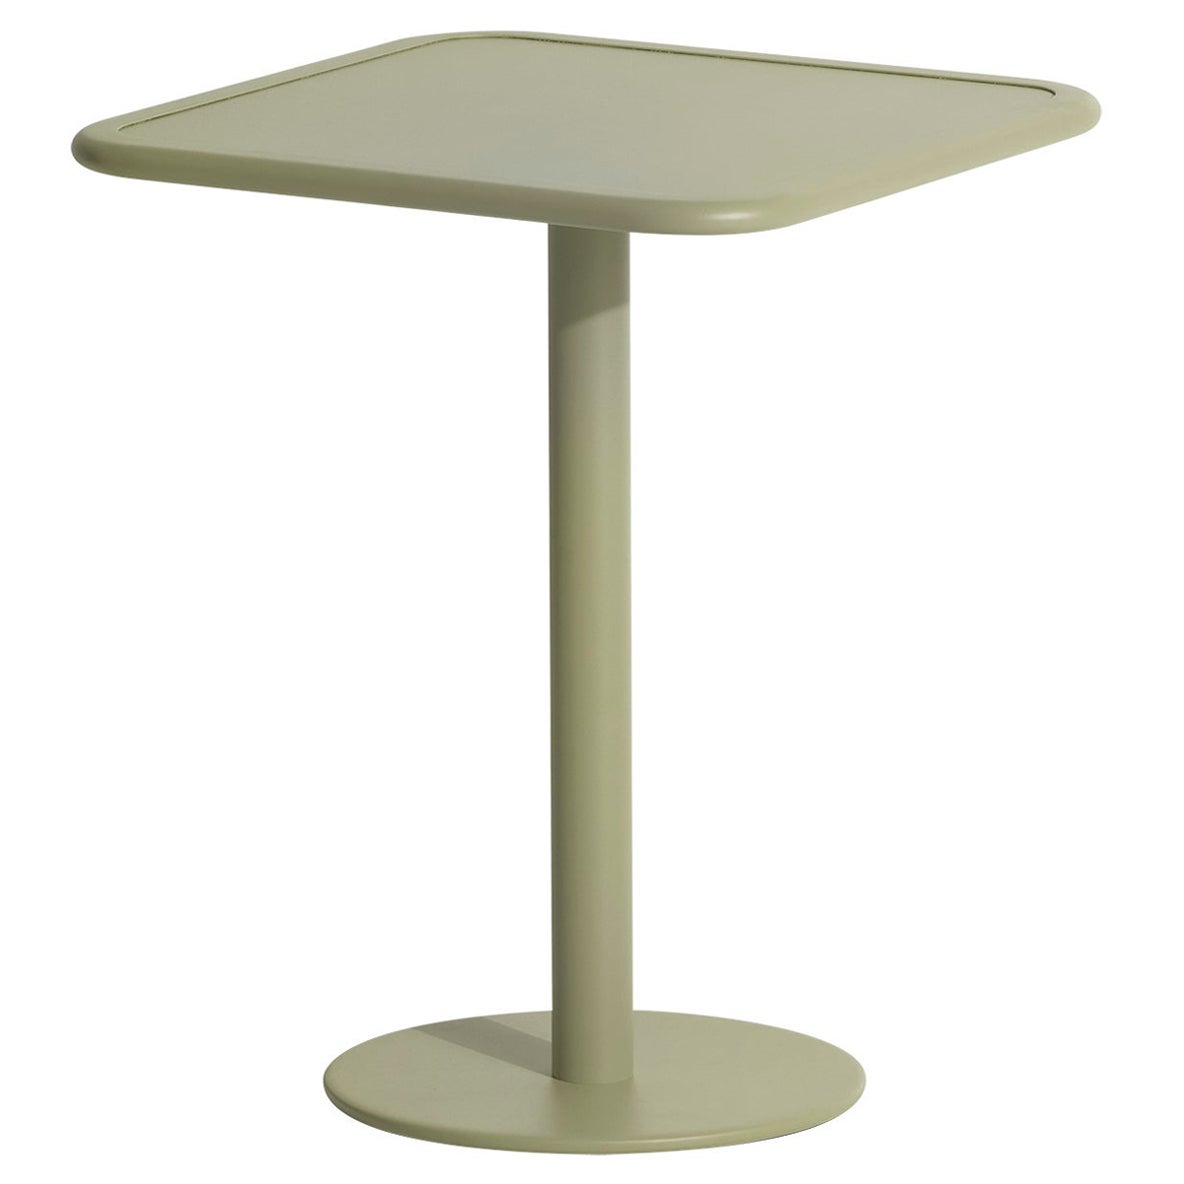 Petite Friture Week-End Bistro Square Dining Table in Jade Green Aluminium, 2017